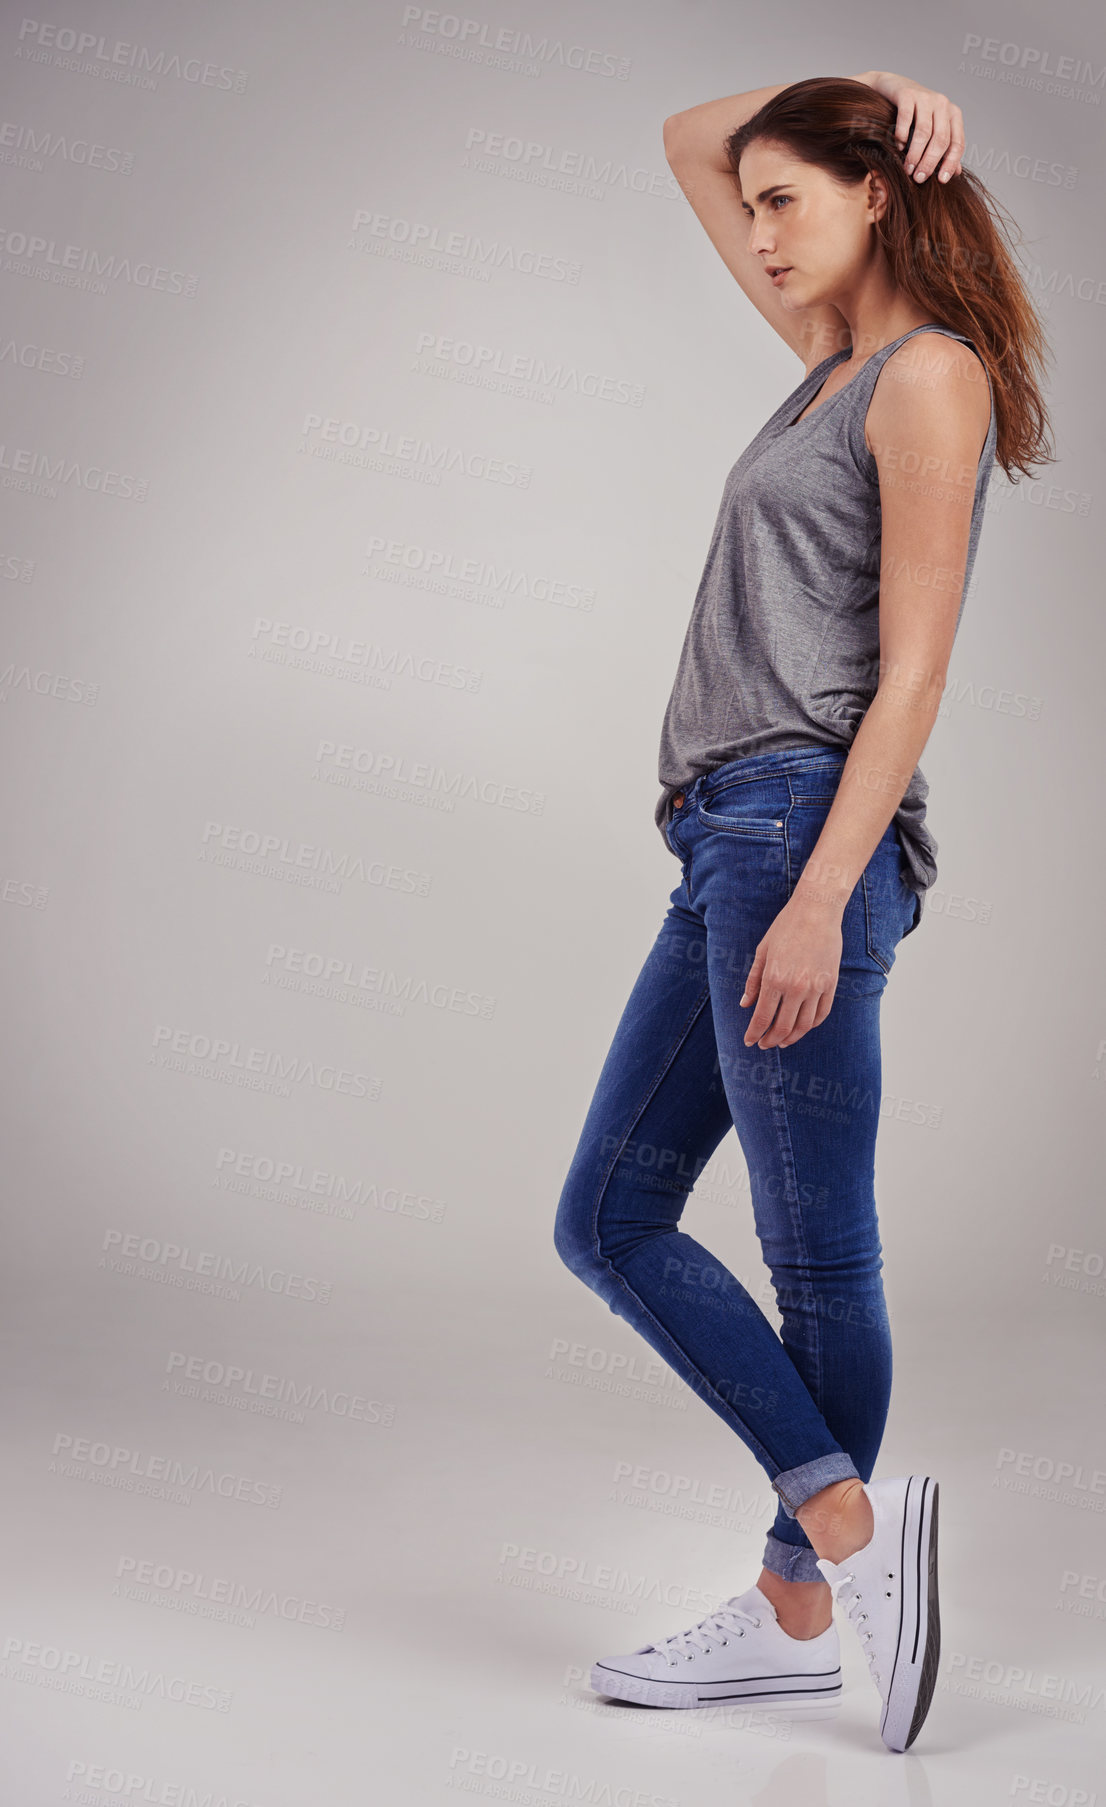 Buy stock photo Full length studio shot of casually-dressed young woman